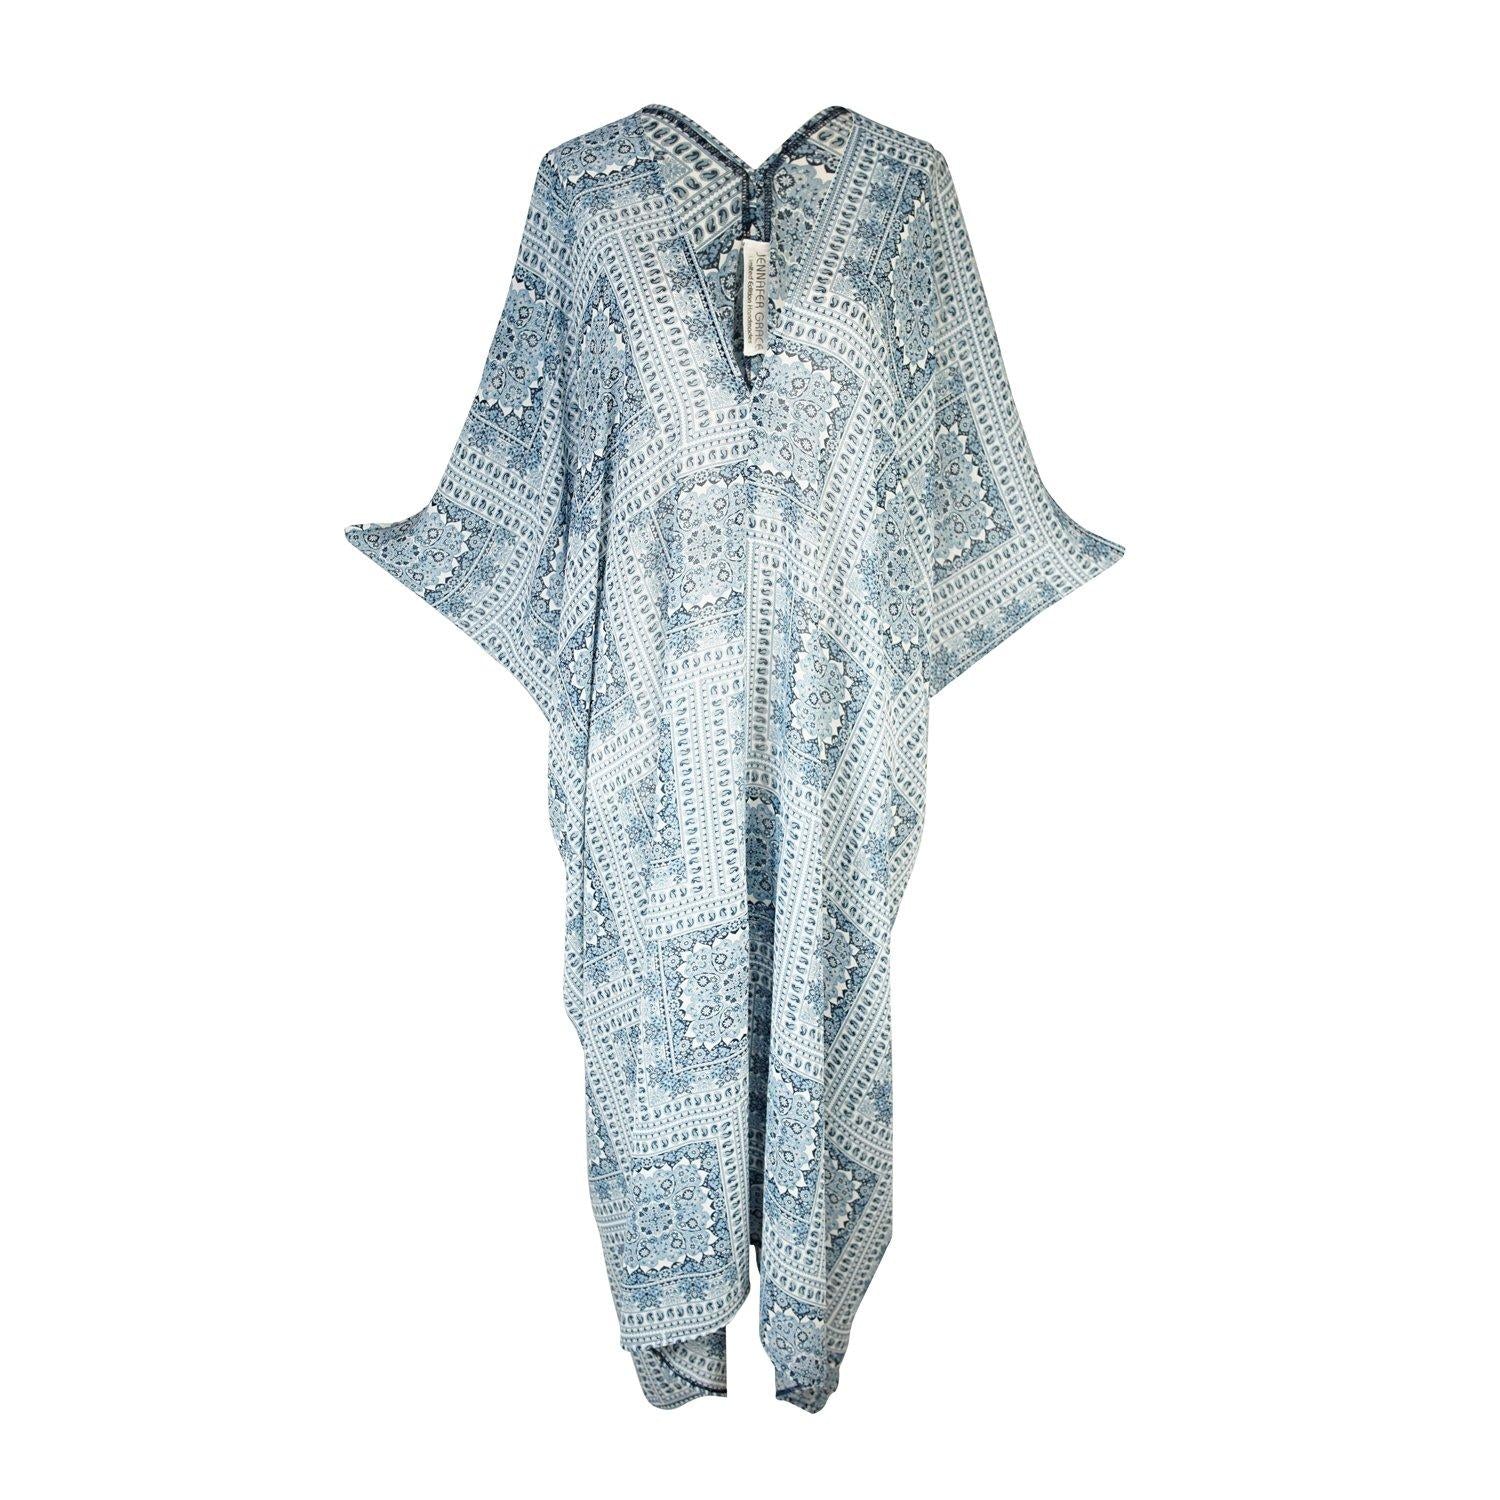 Blue patchwork caftan featuring v-neck, batwing sleeves, and ankle length hem. Airy and flowy, this bohemian inspired caftan dress is great for loungewear, layering, and beachwear. 